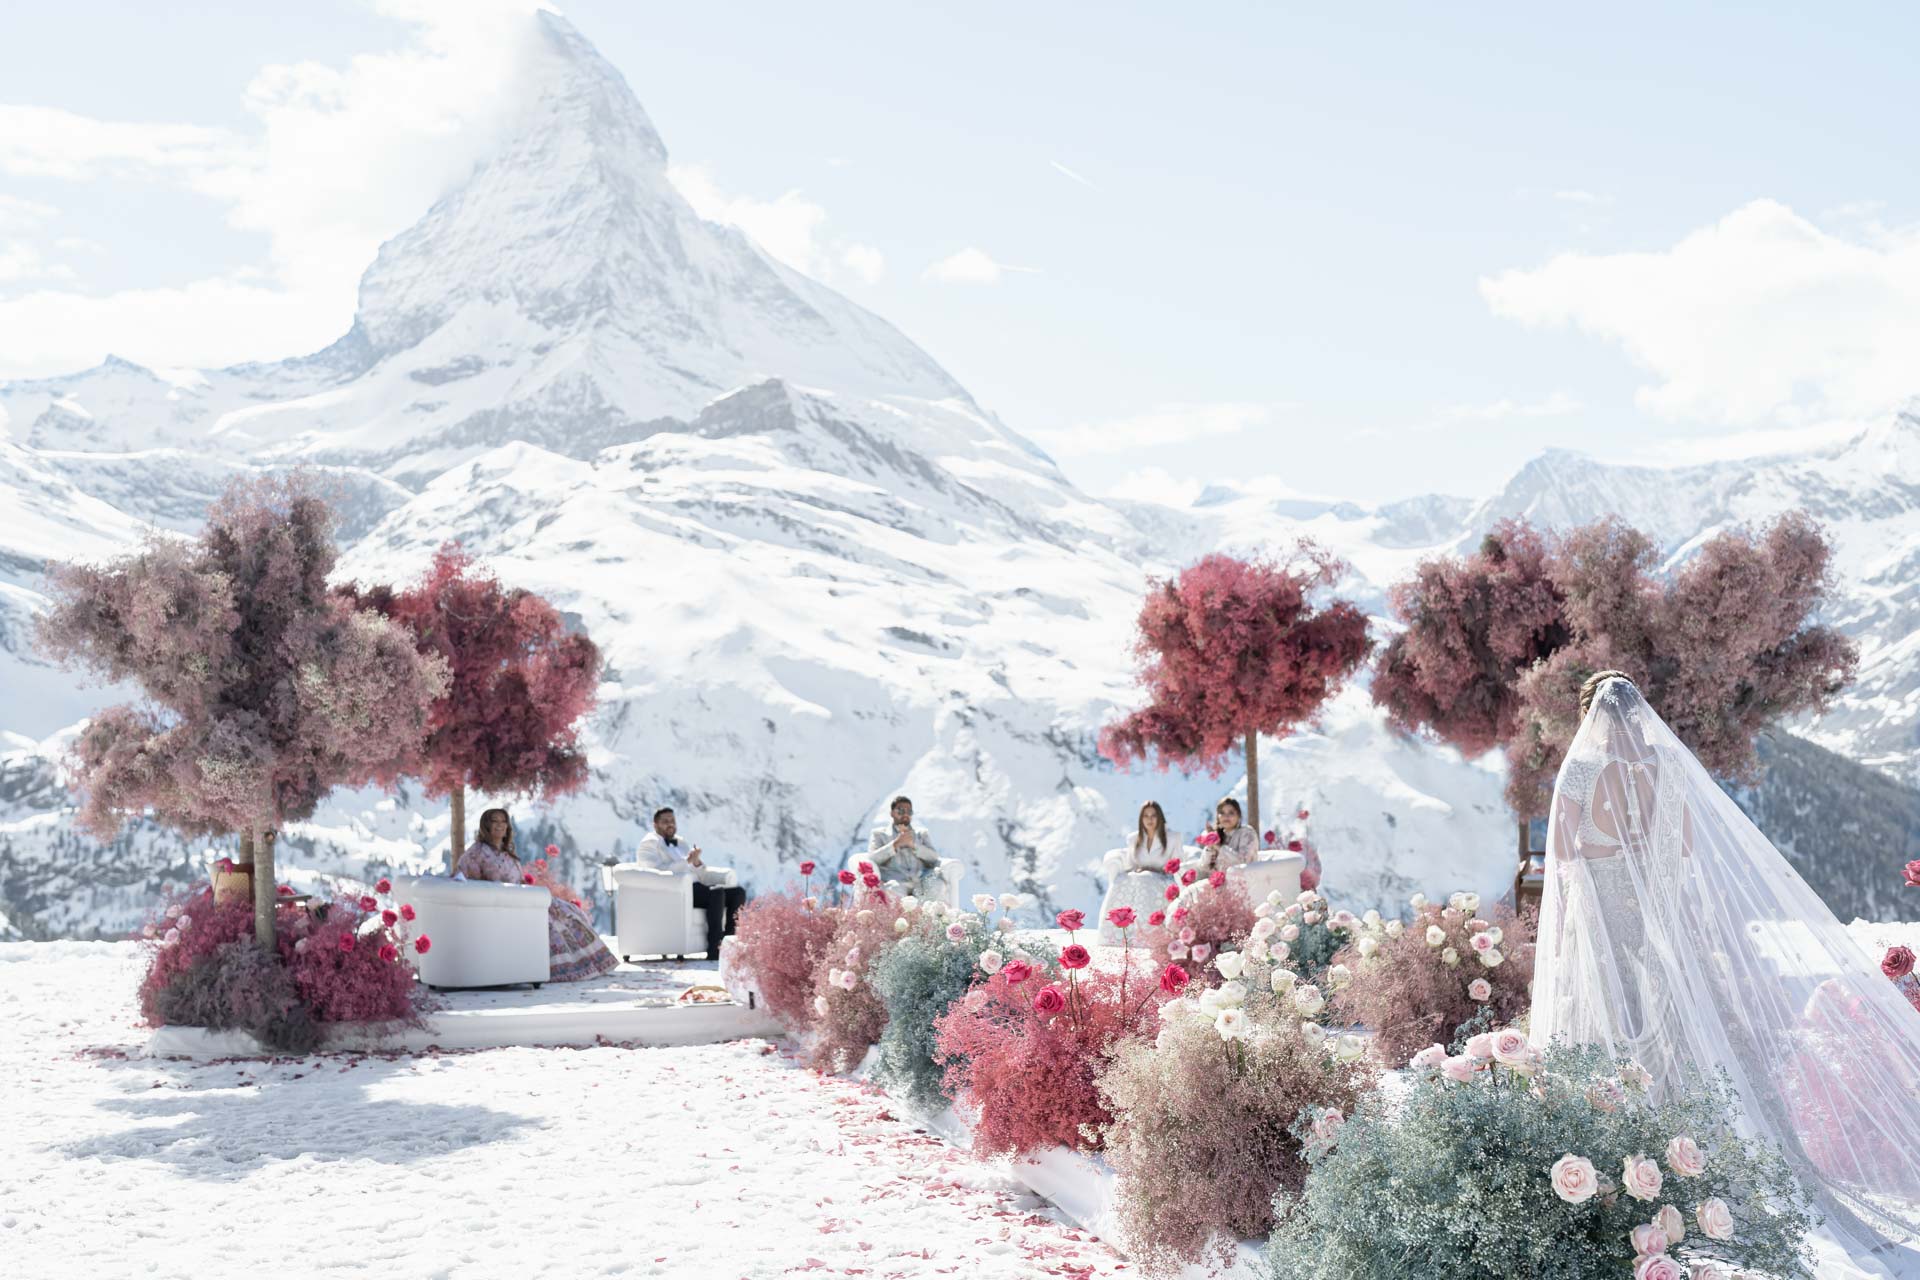 A wedding on the slopes of Matterhorn mountain, between the white of snow and the colors of India :: 30